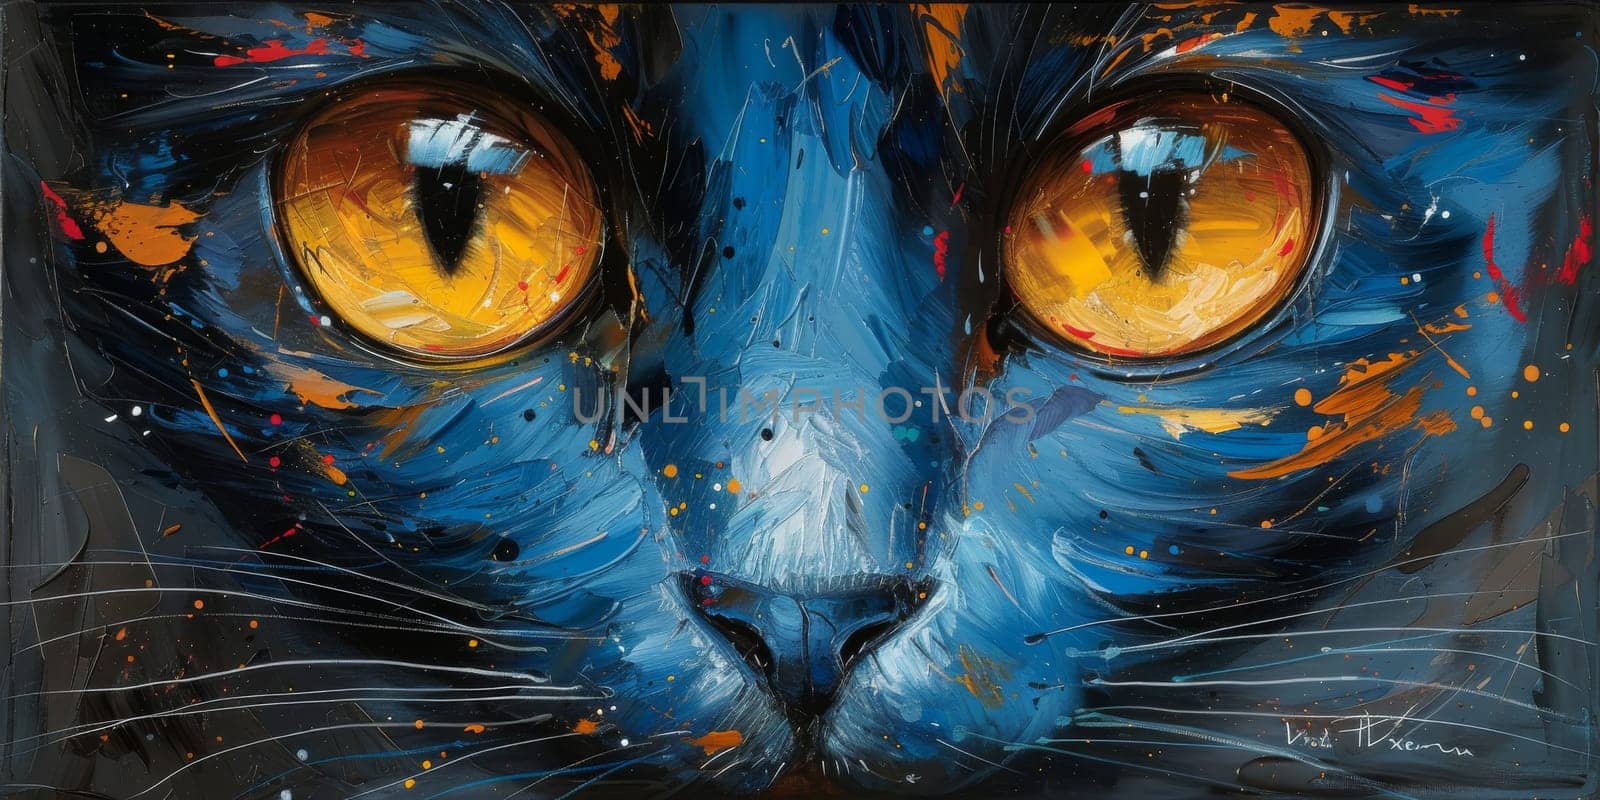 Oil cat portrait painting in multicolored tones. Conceptual abstract painting. Closeup painting oil and palette knife on canvas